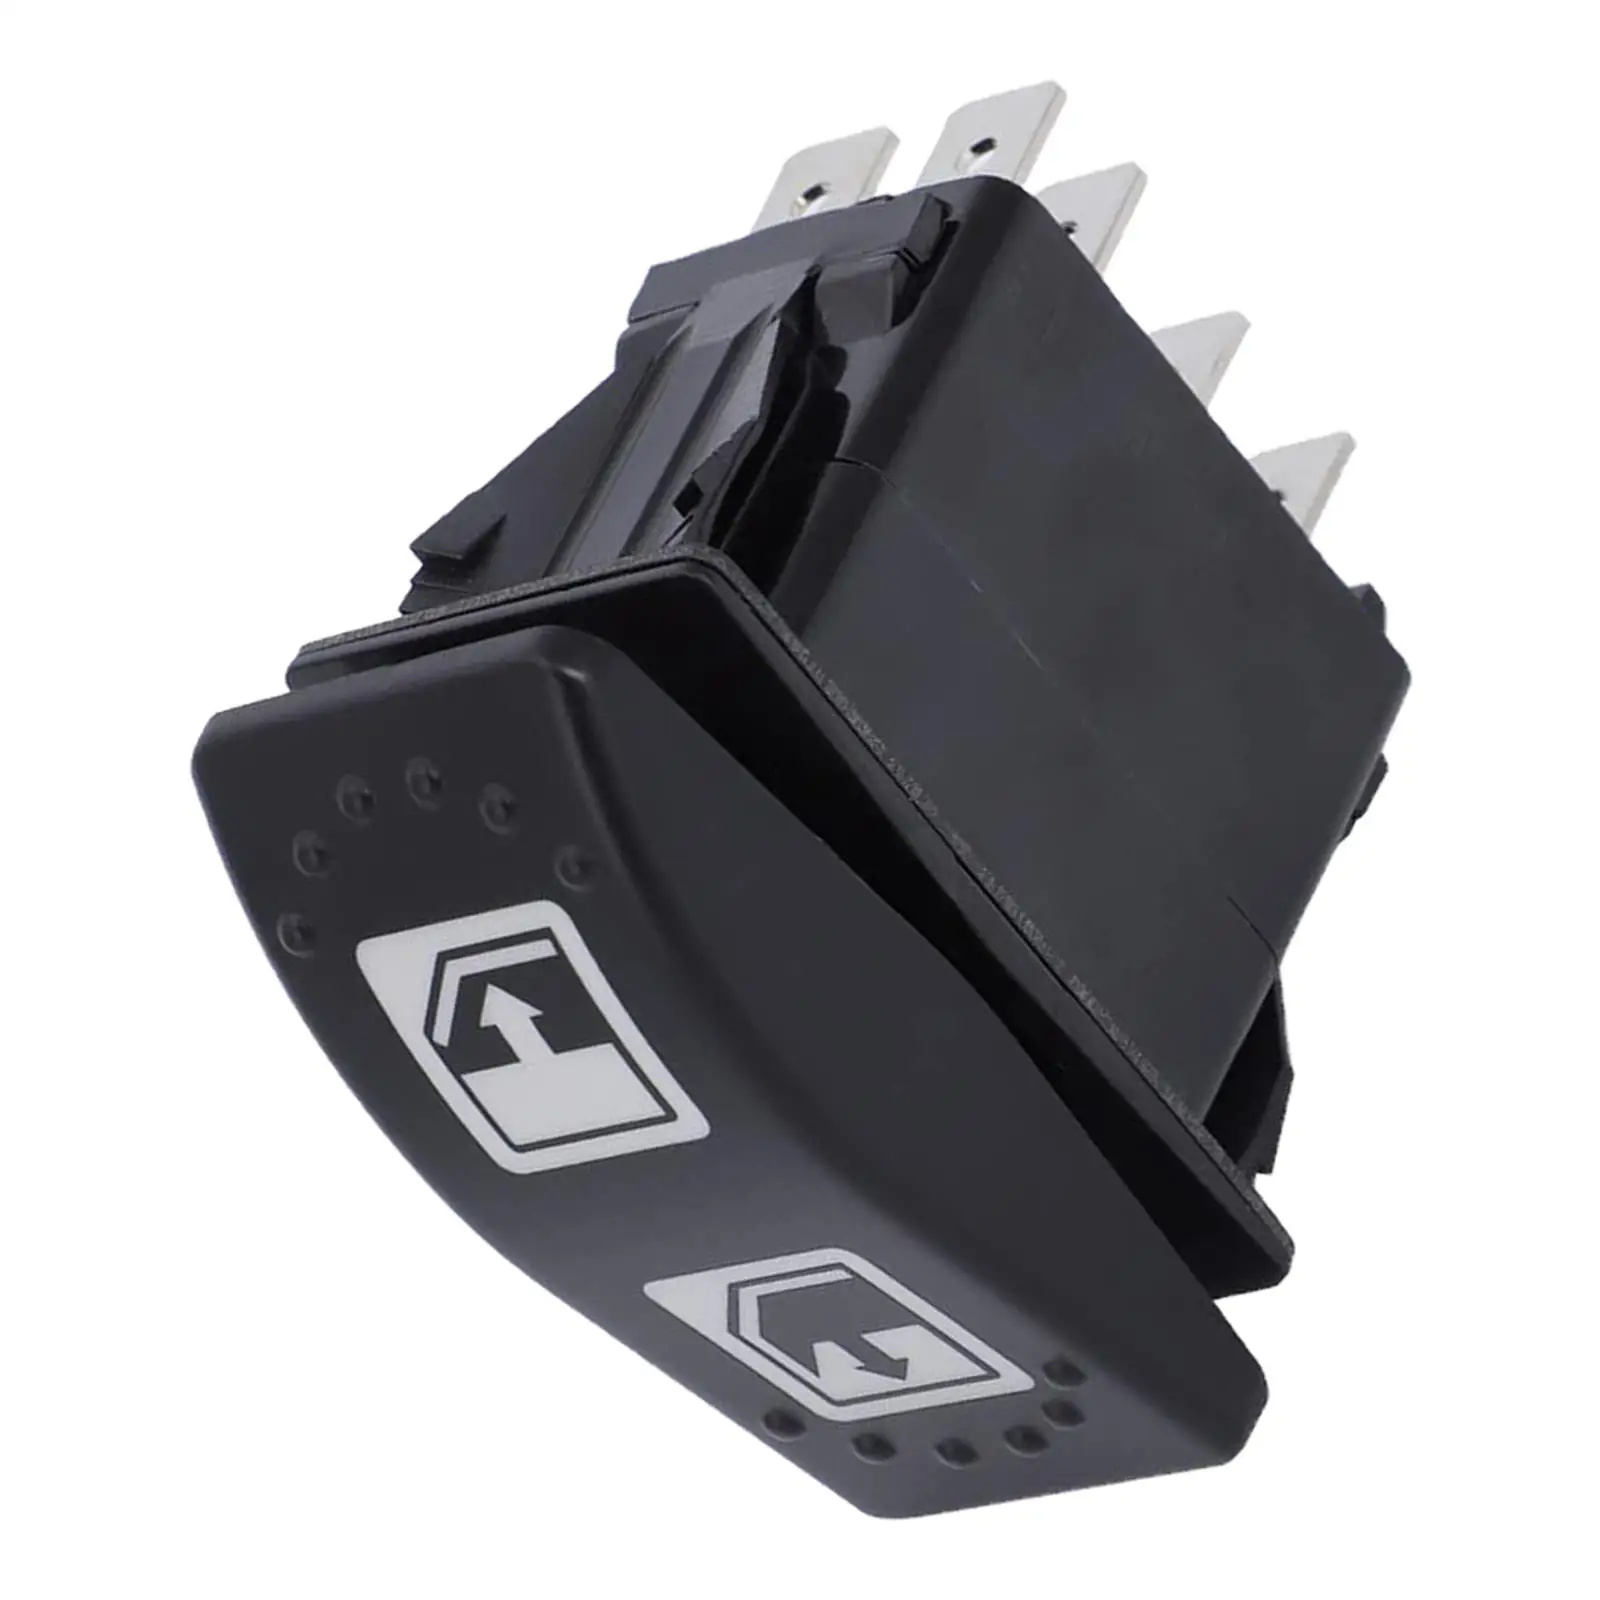 Power Window Switch Am 2016-2019 Lift Left Hand Driver Replaces Accessory Spare Parts Easy Installation